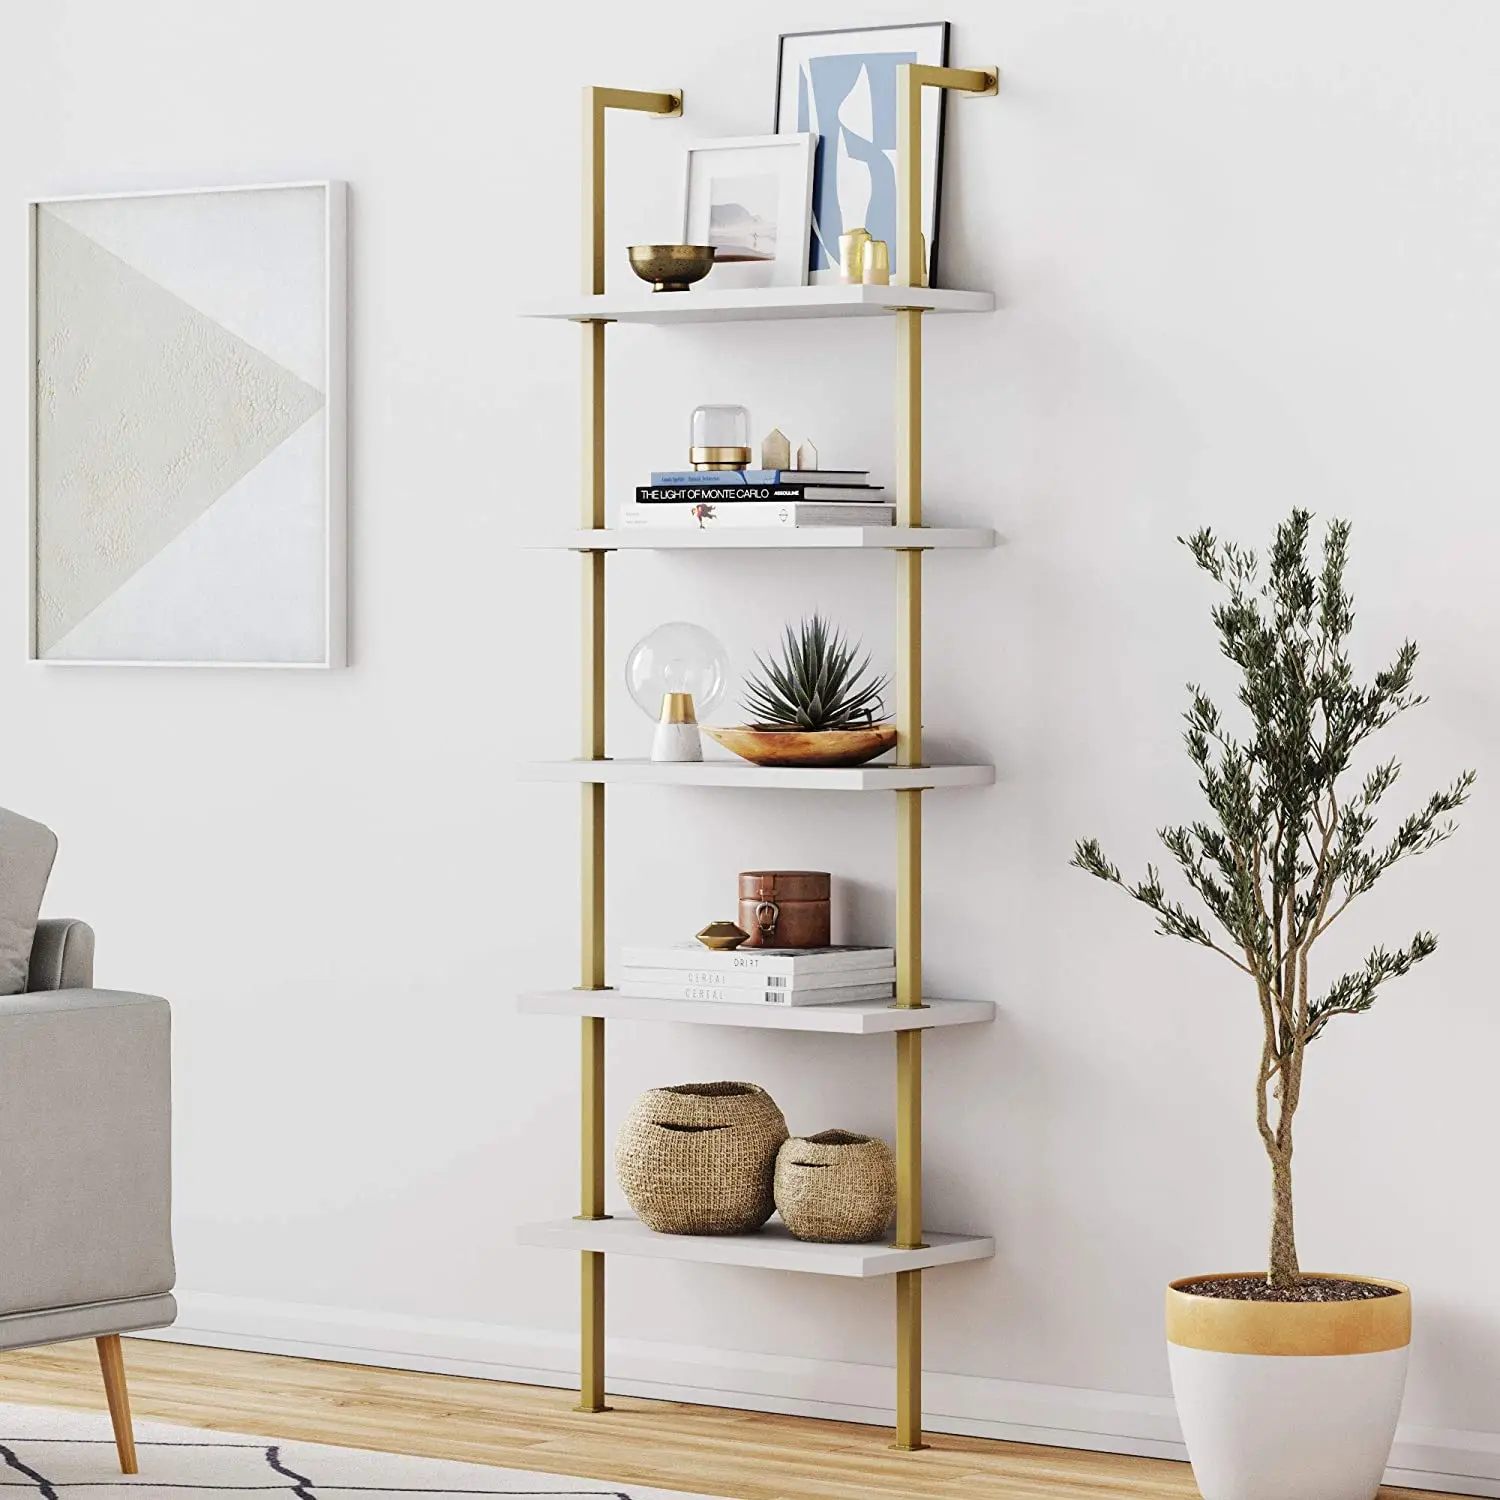 6 Shelf Tall Bookcase with Shelves